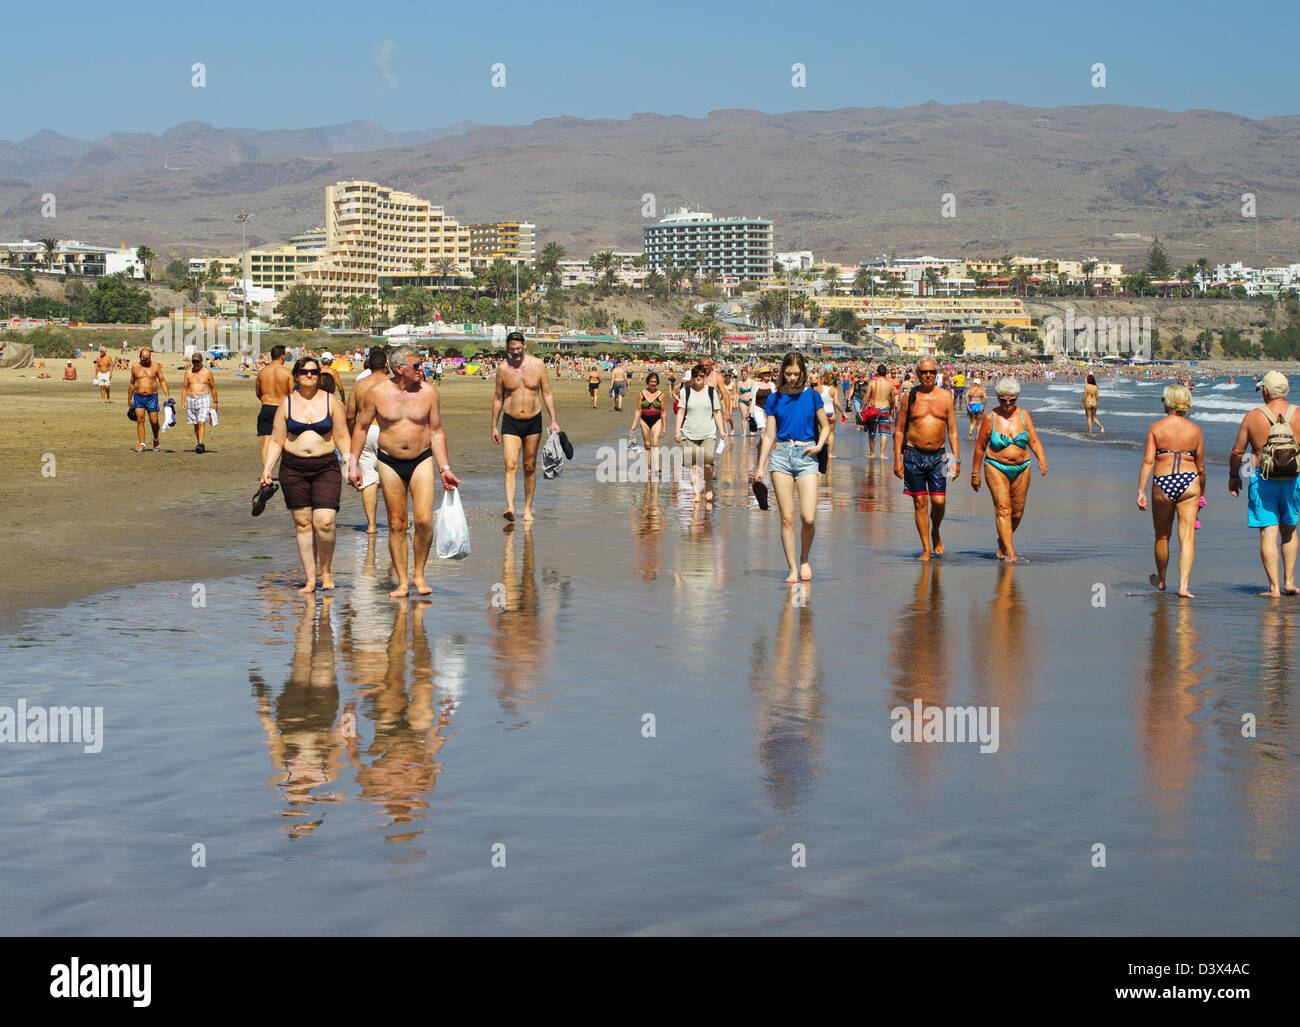 Group of people walking on the wet sands at Playa del Inglés, Gran Canaria Stock Photo